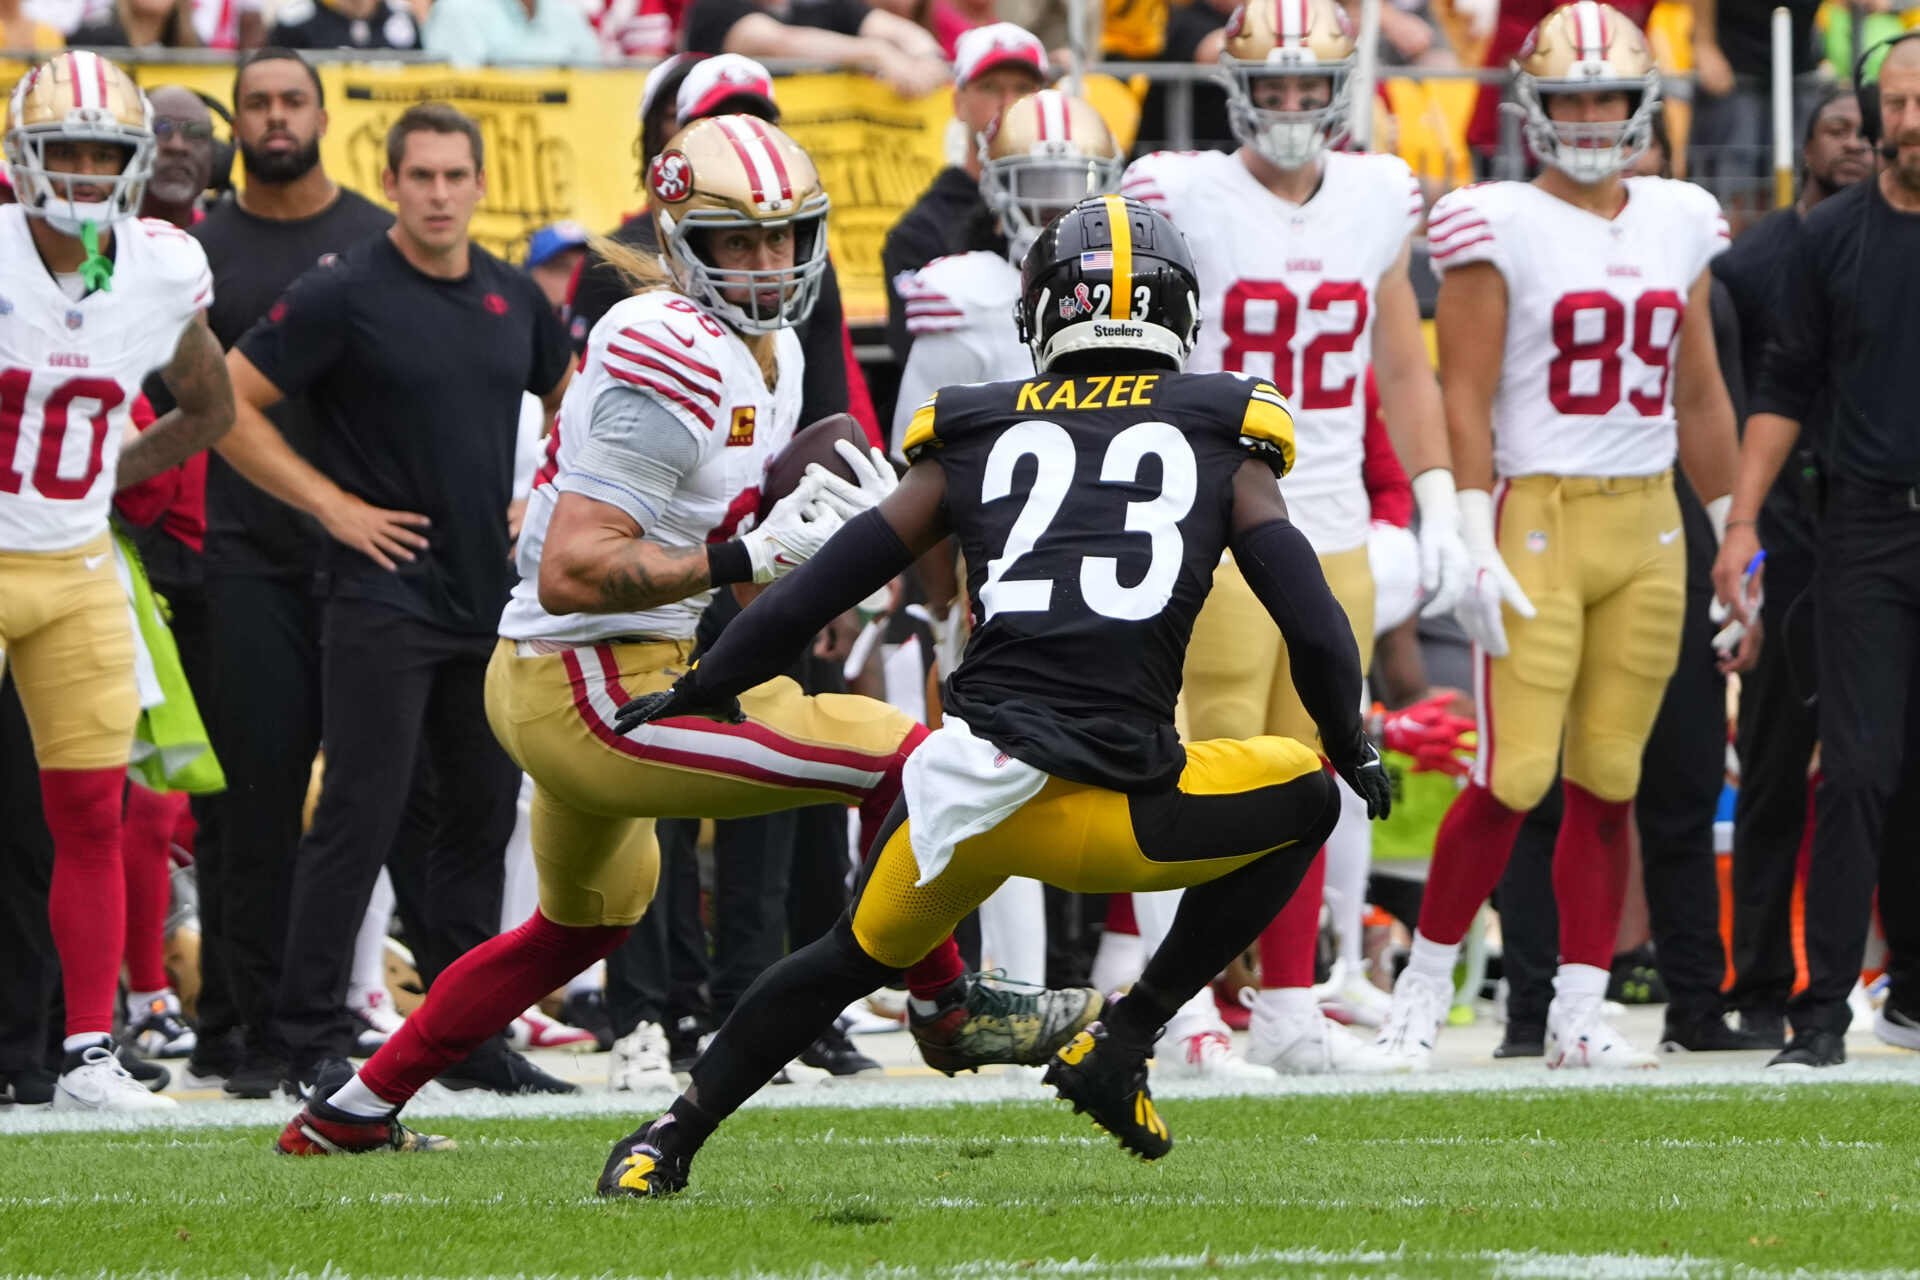 In front of the 49ers sideline, George Kittle tries to cut around Steelers defender Kazee, who has his back to the cameraperson 